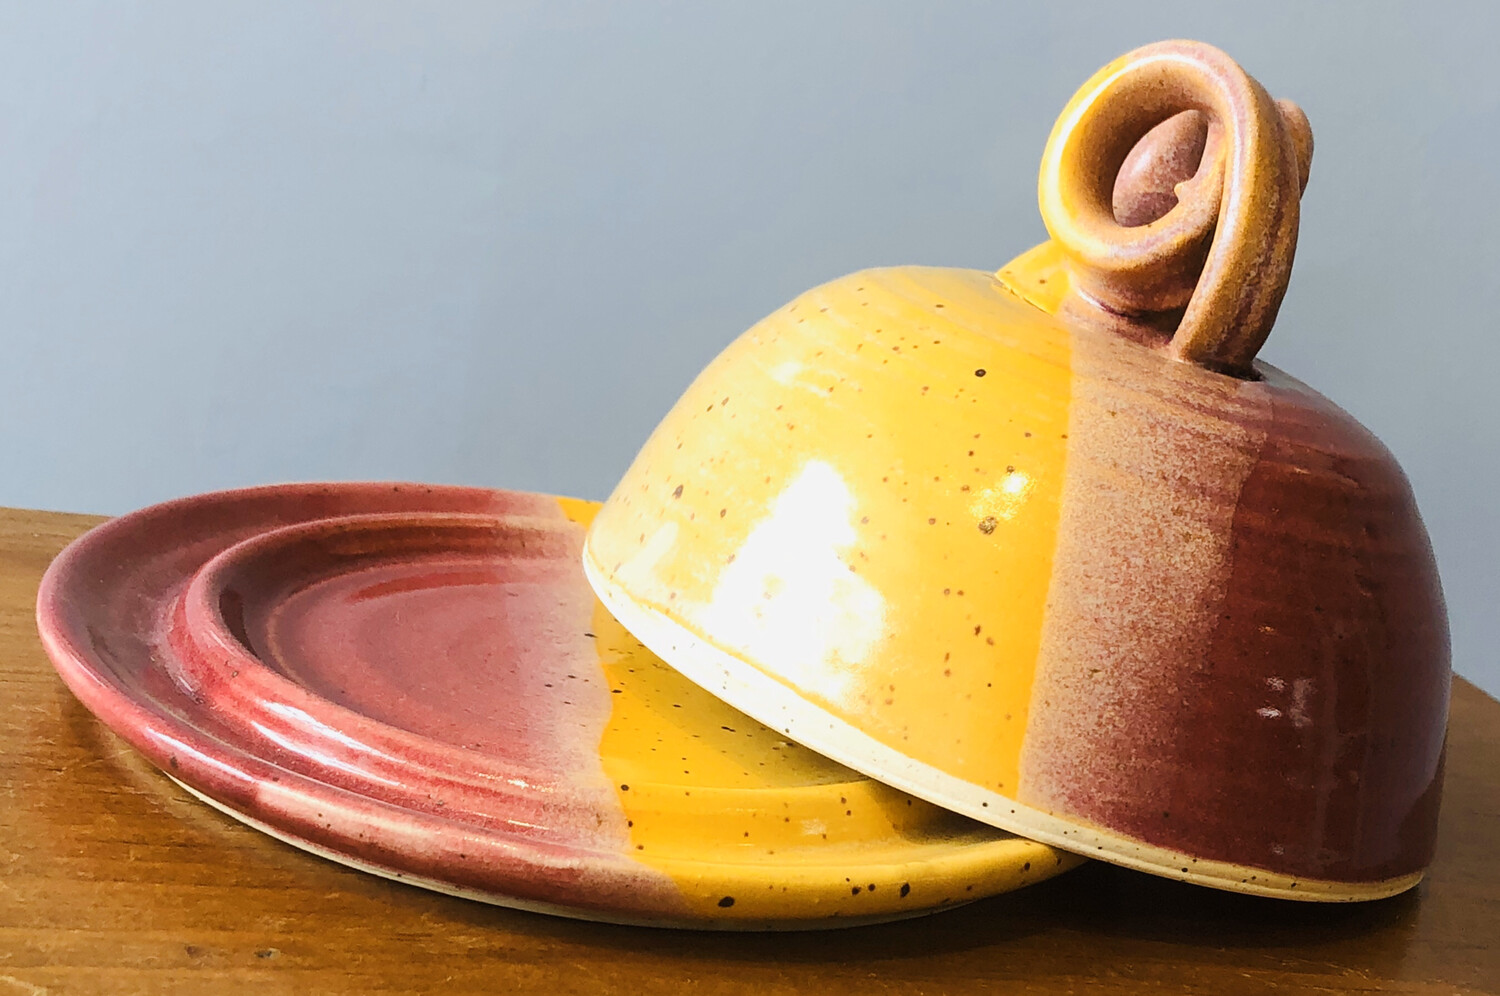 Red & Yellow Butter Dish - Alicia Kate